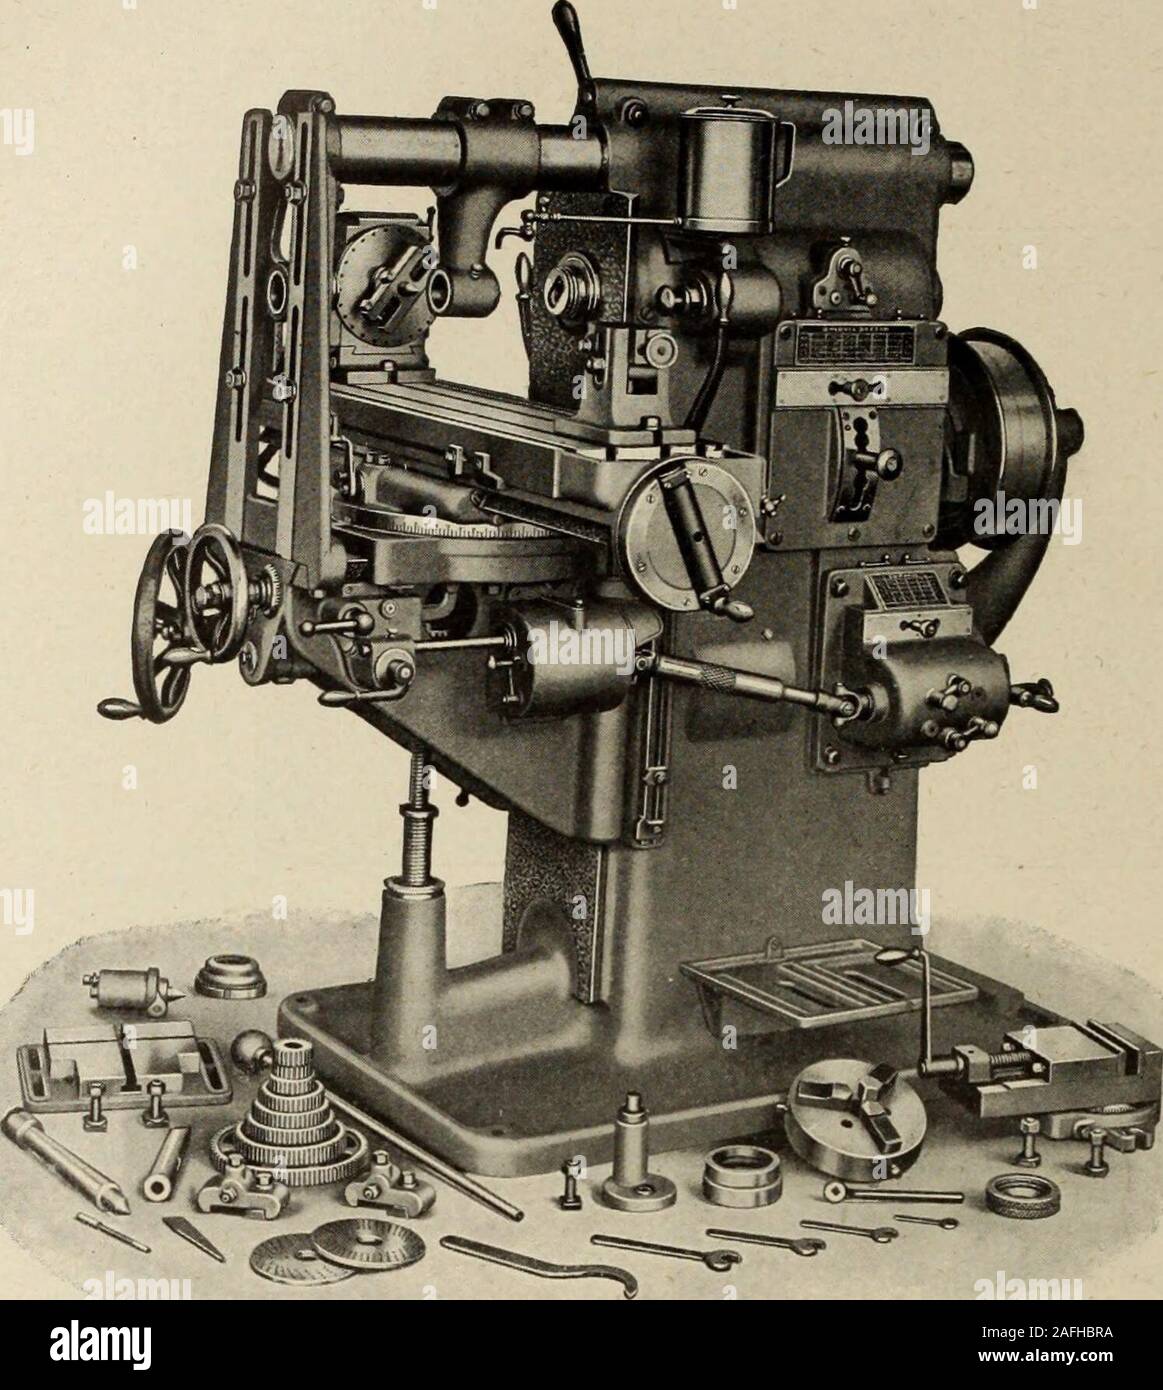 https://c8.alamy.com/comp/2AFHBRA/canadian-machinery-and-metalworking-january-june-1913-buffalo-armor-platepunches-and-shears-where-light-weight-and-saving-of-space-are-objects-of-im-portance-the-buffalo-armor-plate-construction-is-of-greatadvantage-as-it-gives-a-50-reduction-in-both-items-com-pared-with-cast-iron-machines-we-keep-in-stock-and-build-to-order-machines-of-anycapacity-with-or-without-interchangeable-tools-for-punch-ing-and-shearing-plates-bars-squares-rounds-angle-andtee-irons-i-beams-etccatalogue-178-10-shows-the-full-line-ask-for-a-copy-canadian-buffalo-forge-co-limited-montreal-que-winn-2AFHBRA.jpg